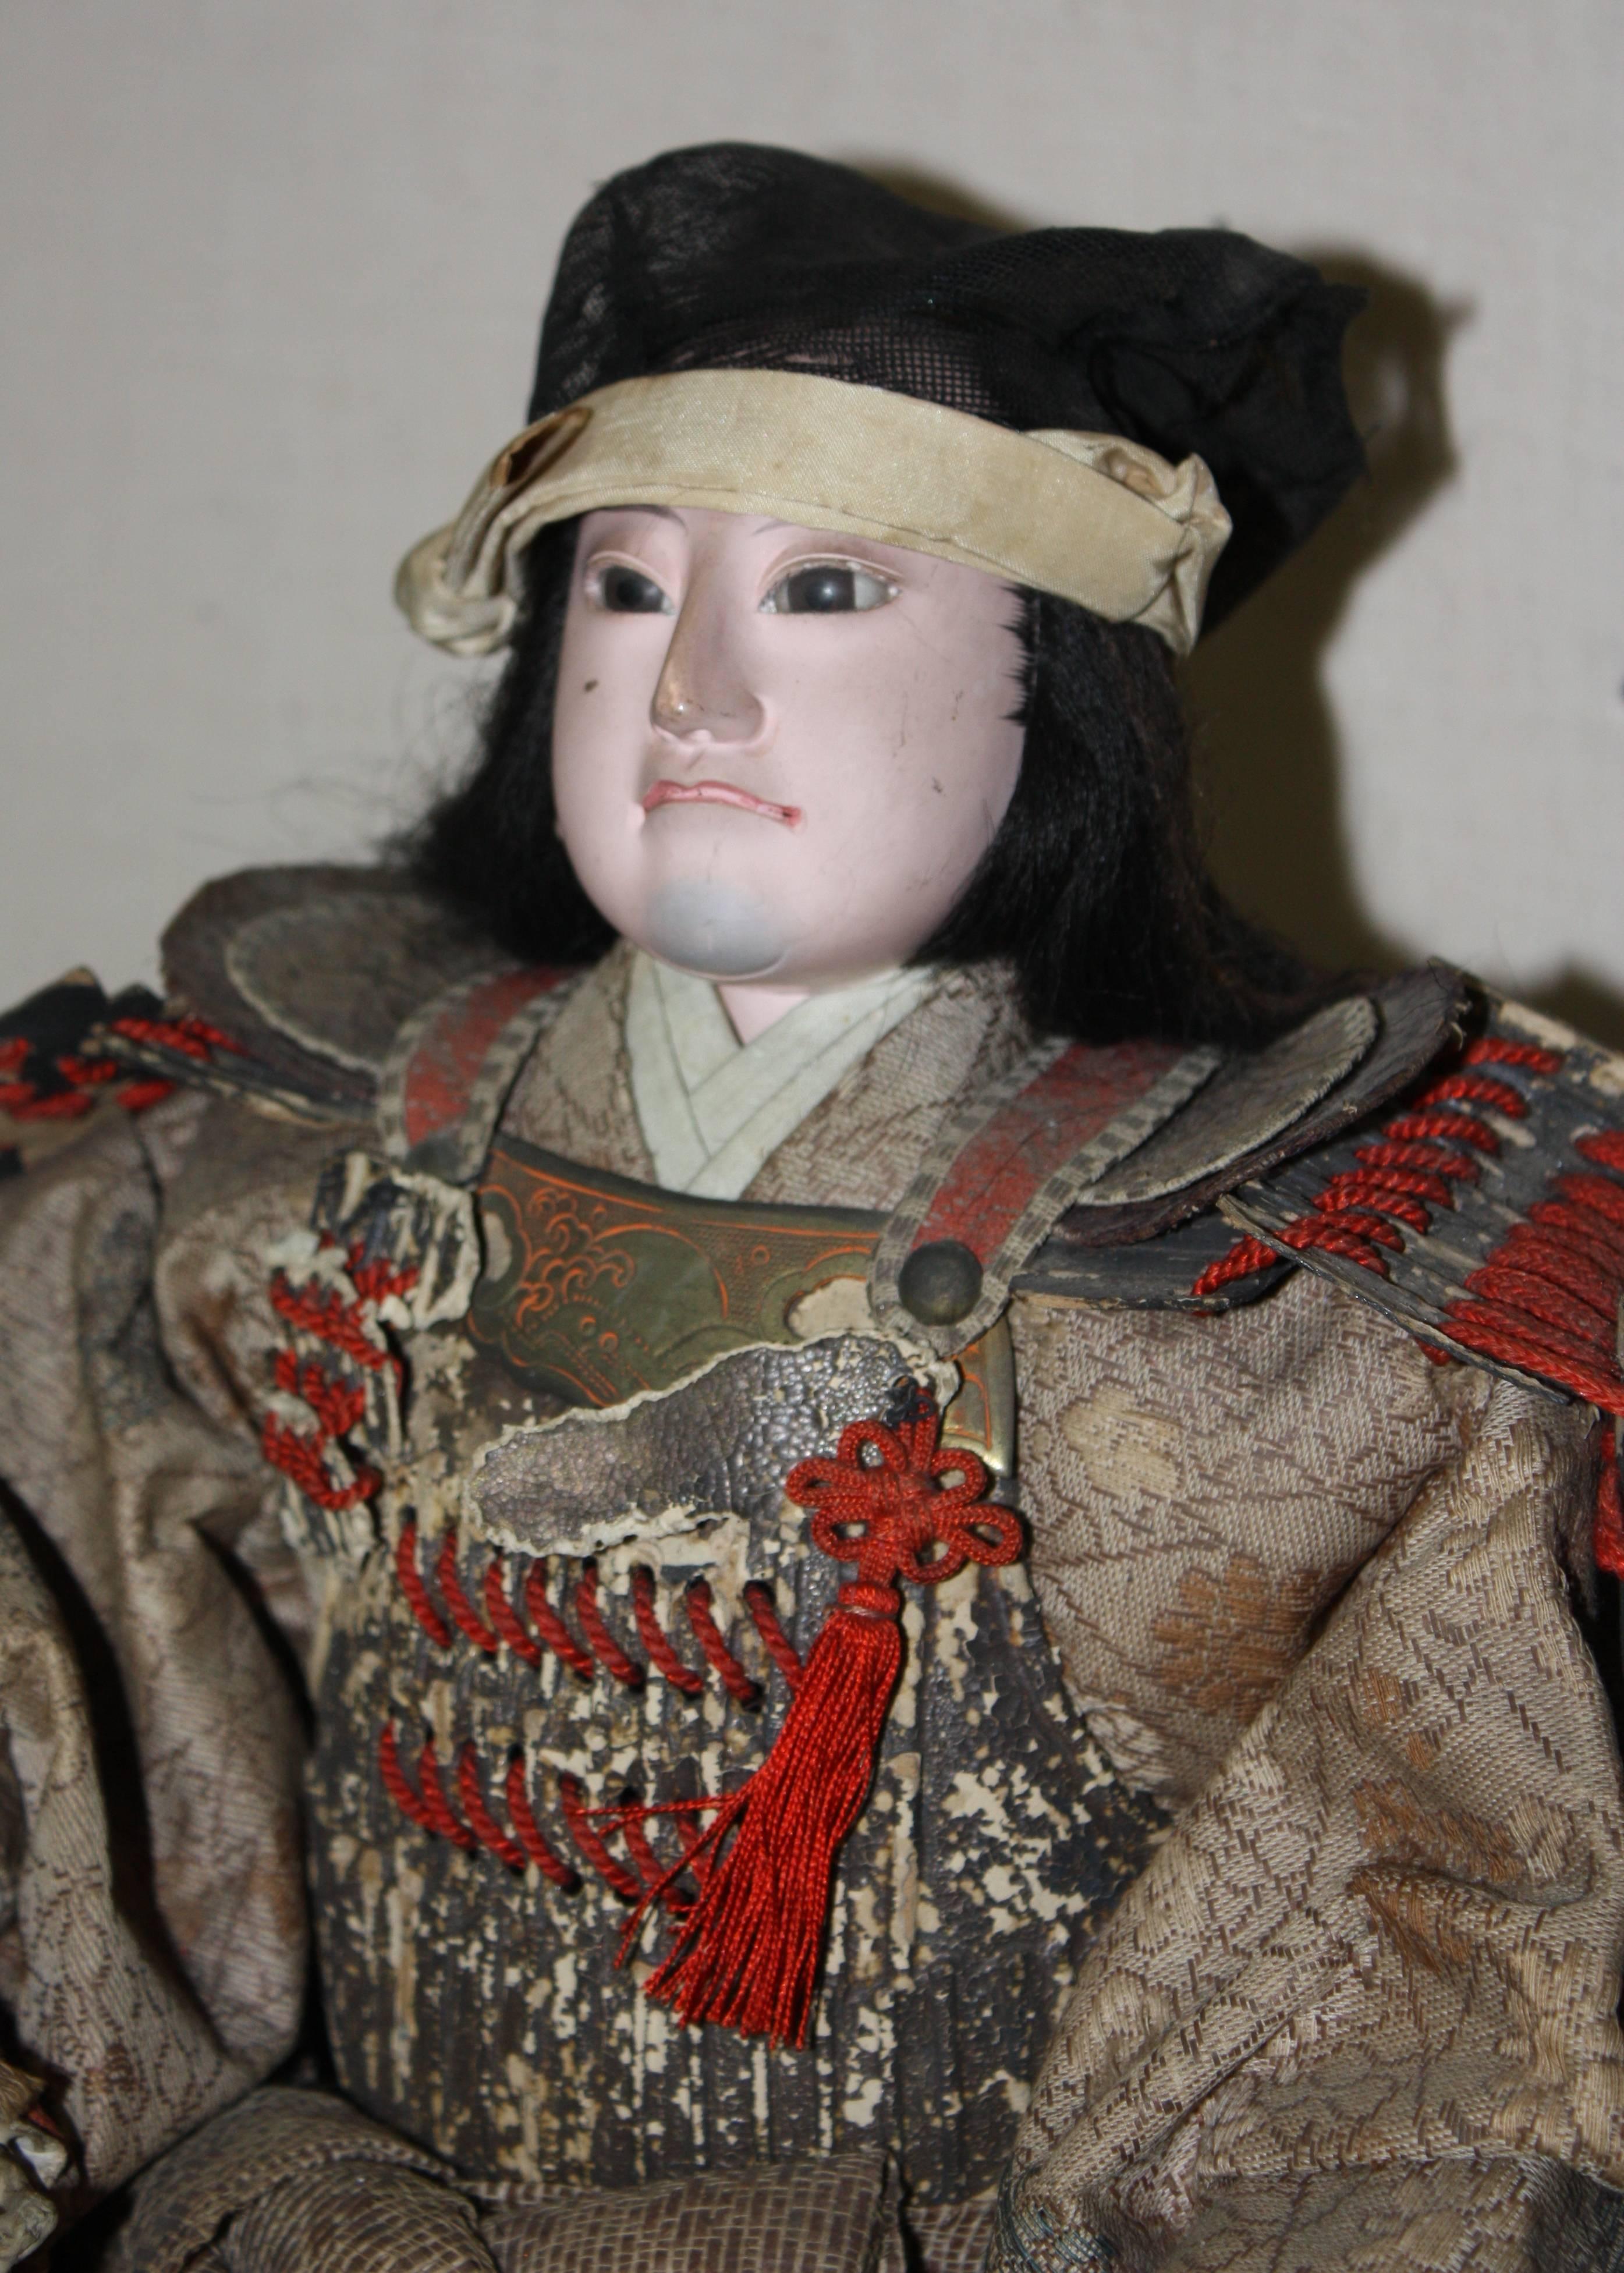 A wonderful Meiji period Japanese samurai doll with porcelain face and hands with armor and period costume, late 19th century.